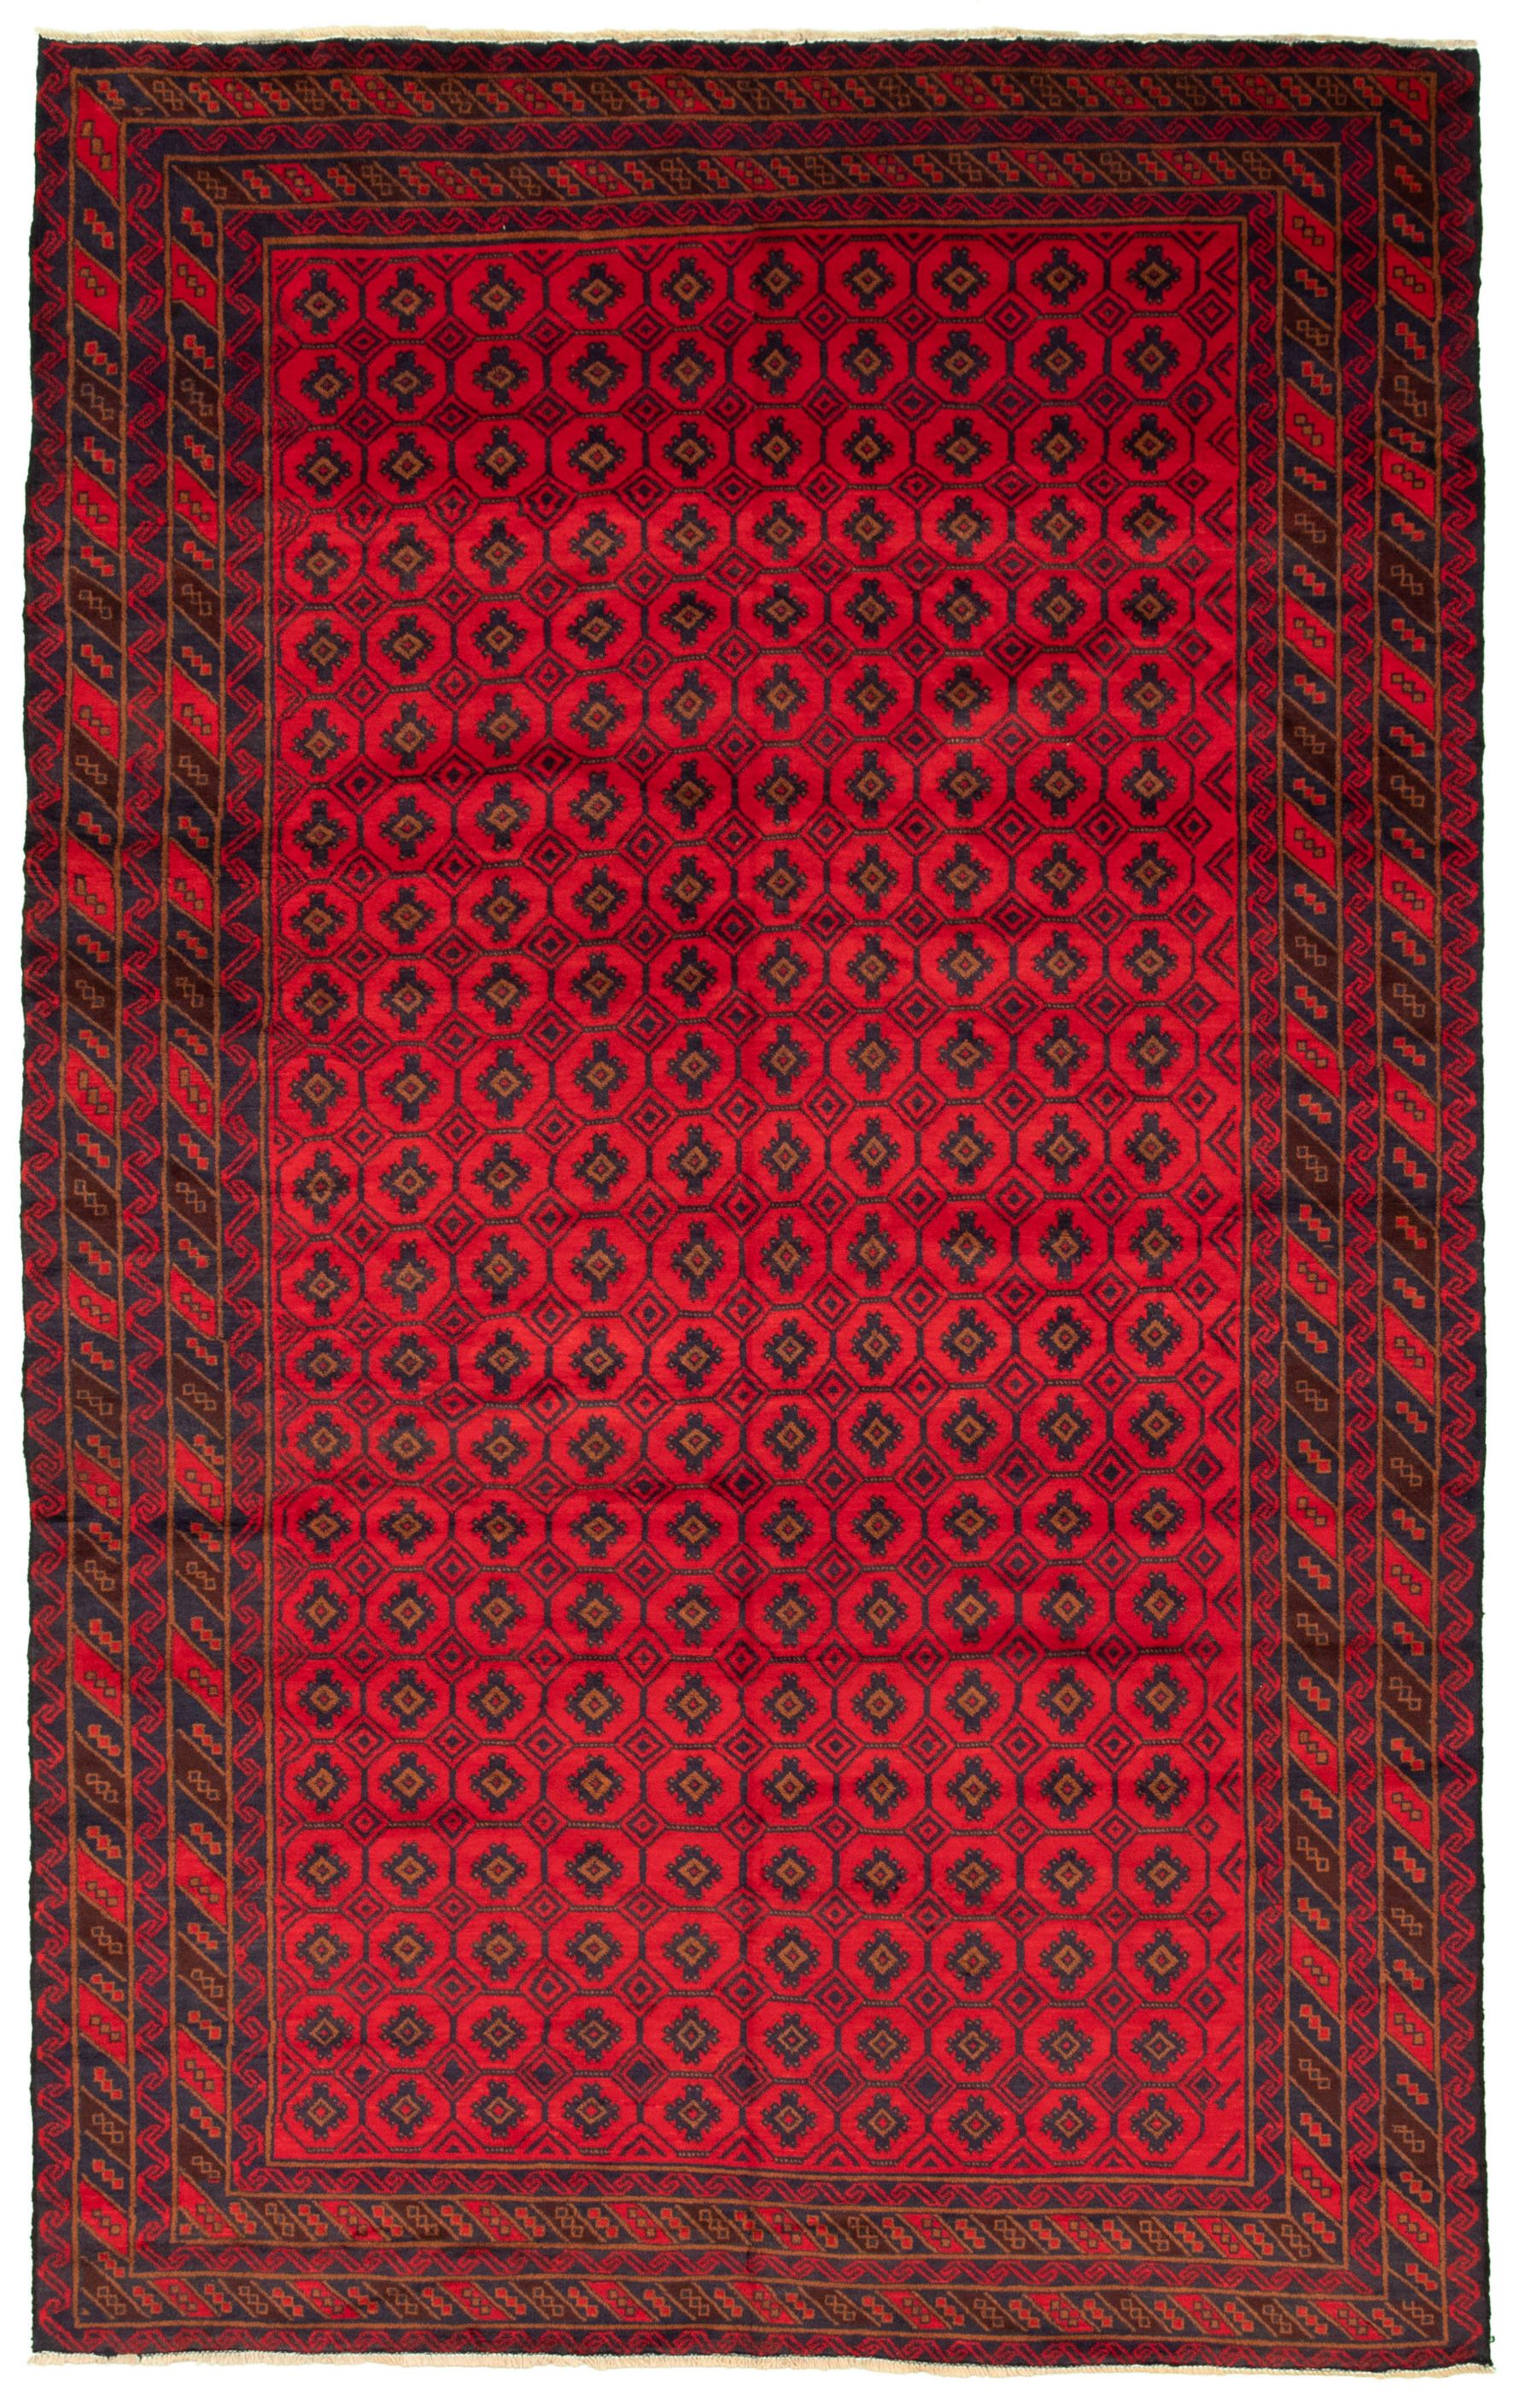 Hand-knotted Teimani Red Wool Rug 6'11" x 10'11" Size: 6'11" x 10'11"  